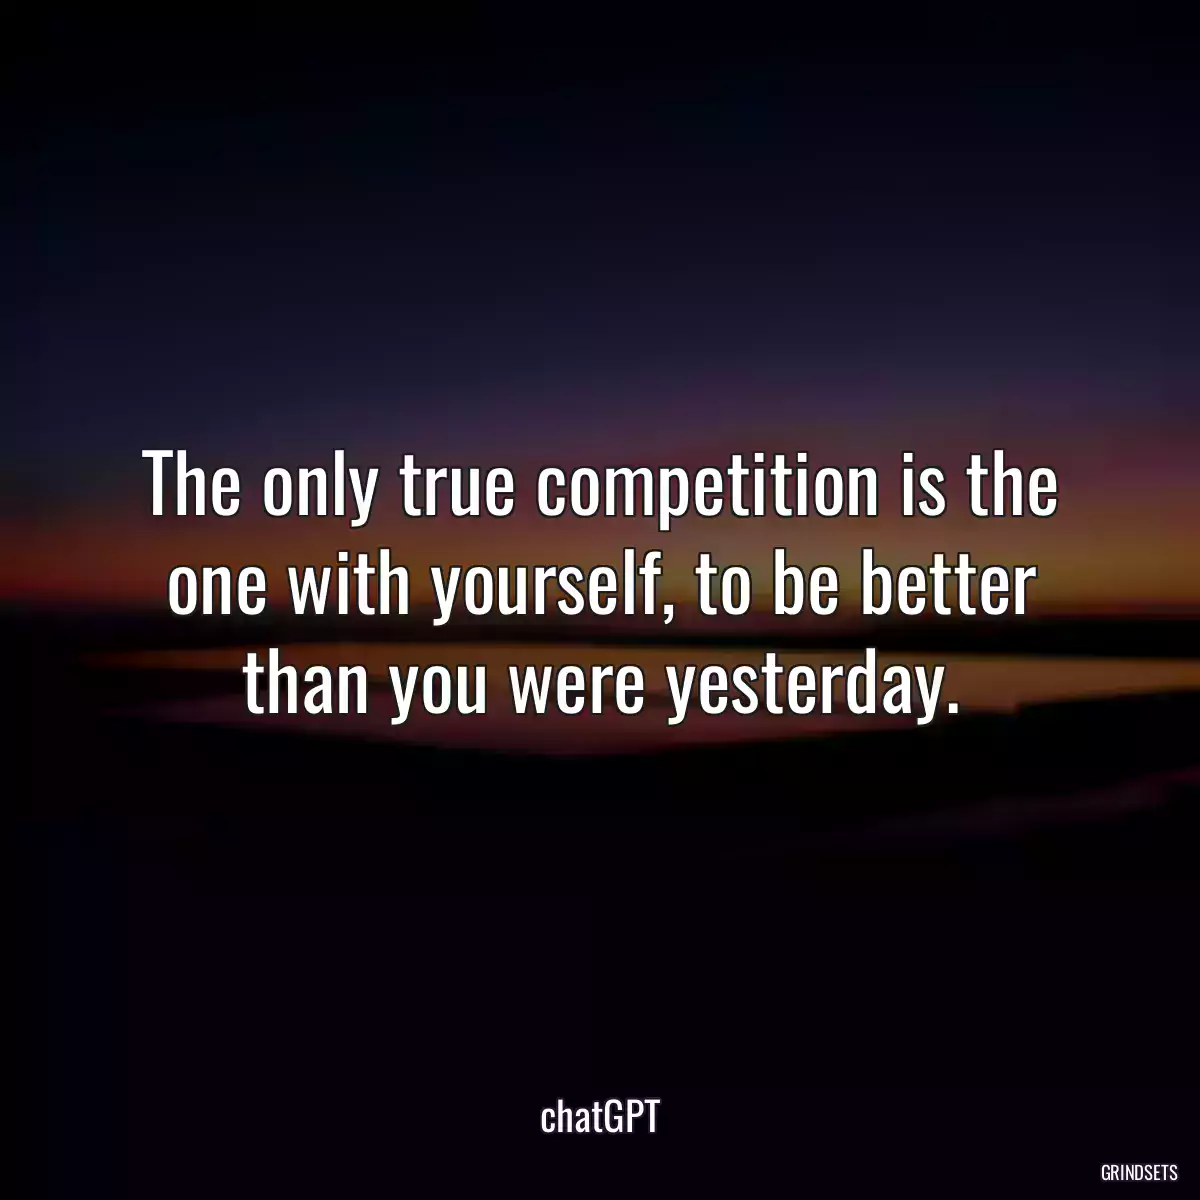 The only true competition is the one with yourself, to be better than you were yesterday.